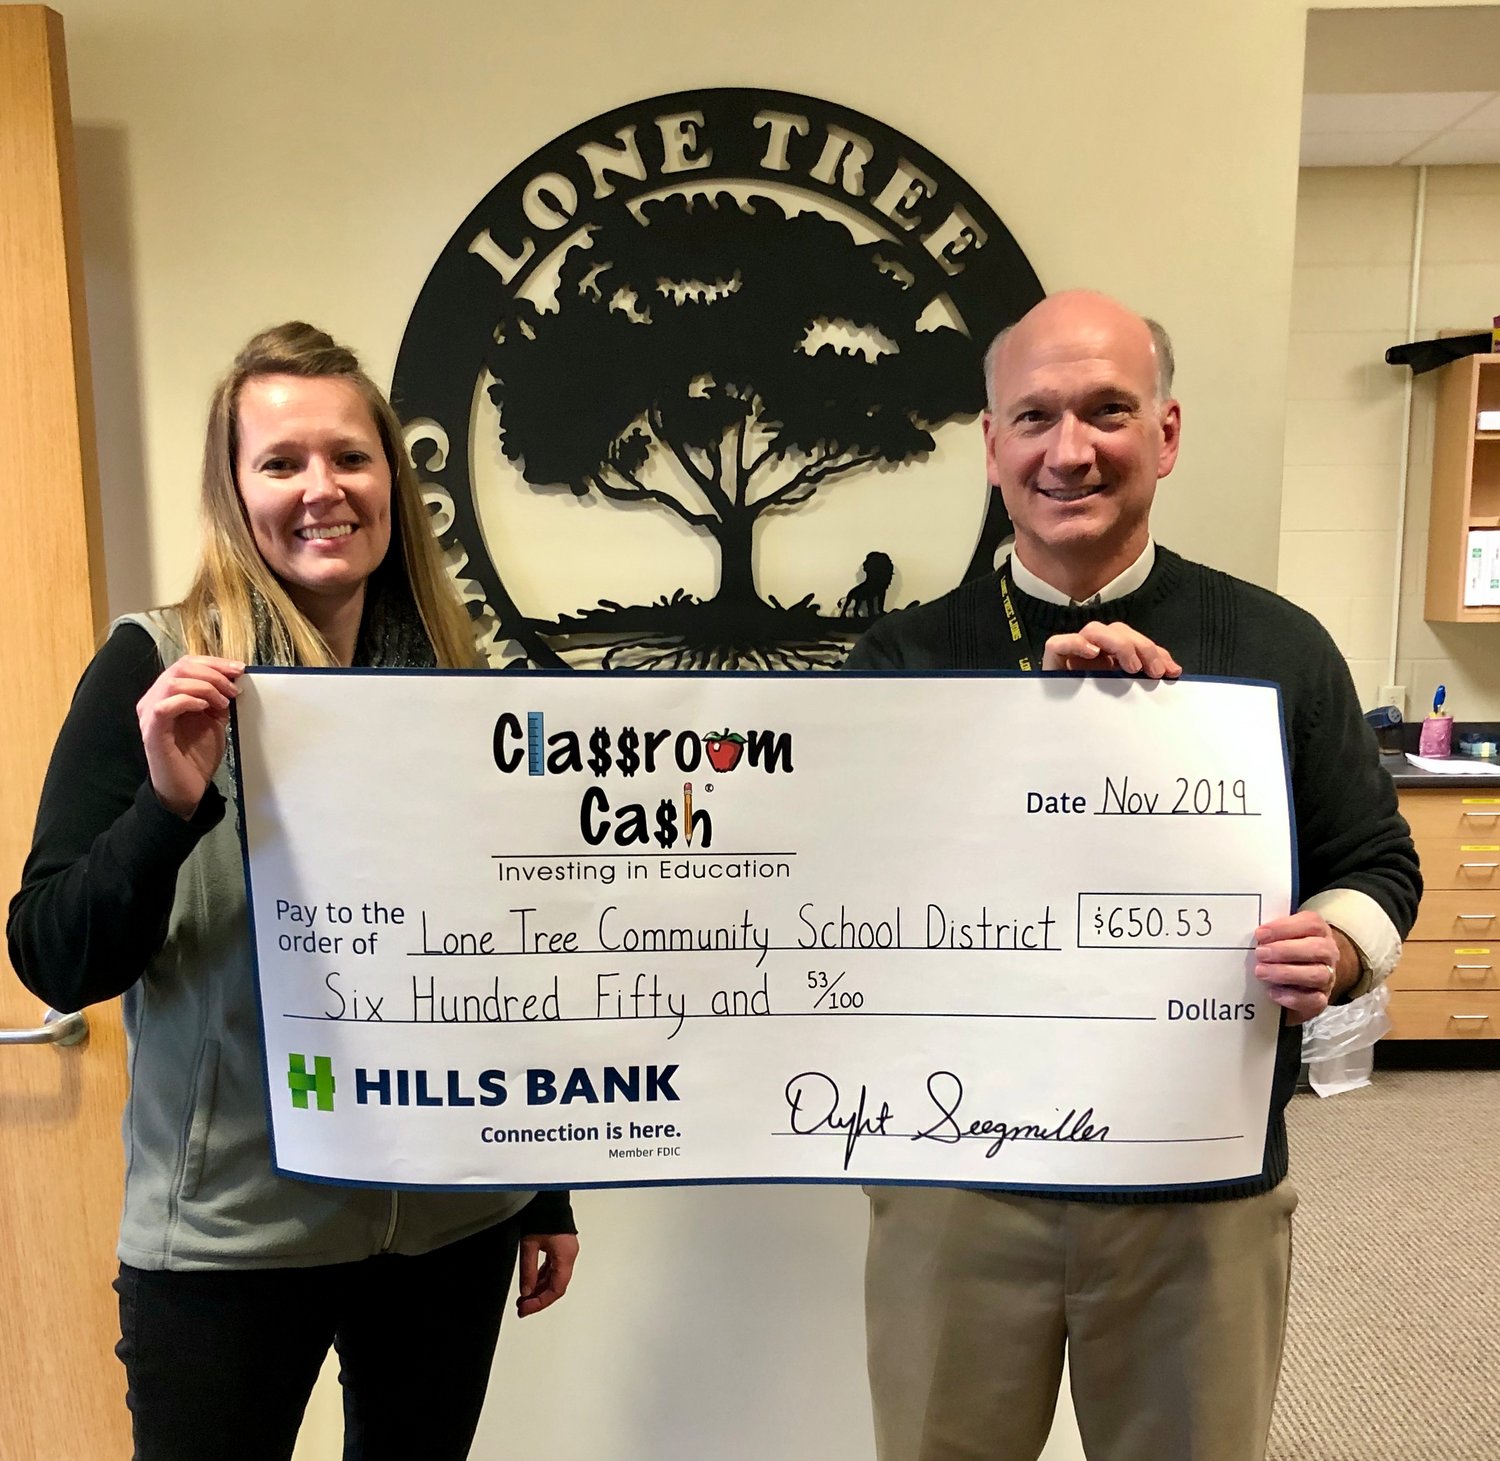 Jenni Eden (left) from Hills Bank presents Lone Tree Superintendent Ken Crawford with a Classroom Cash check for $650.53.